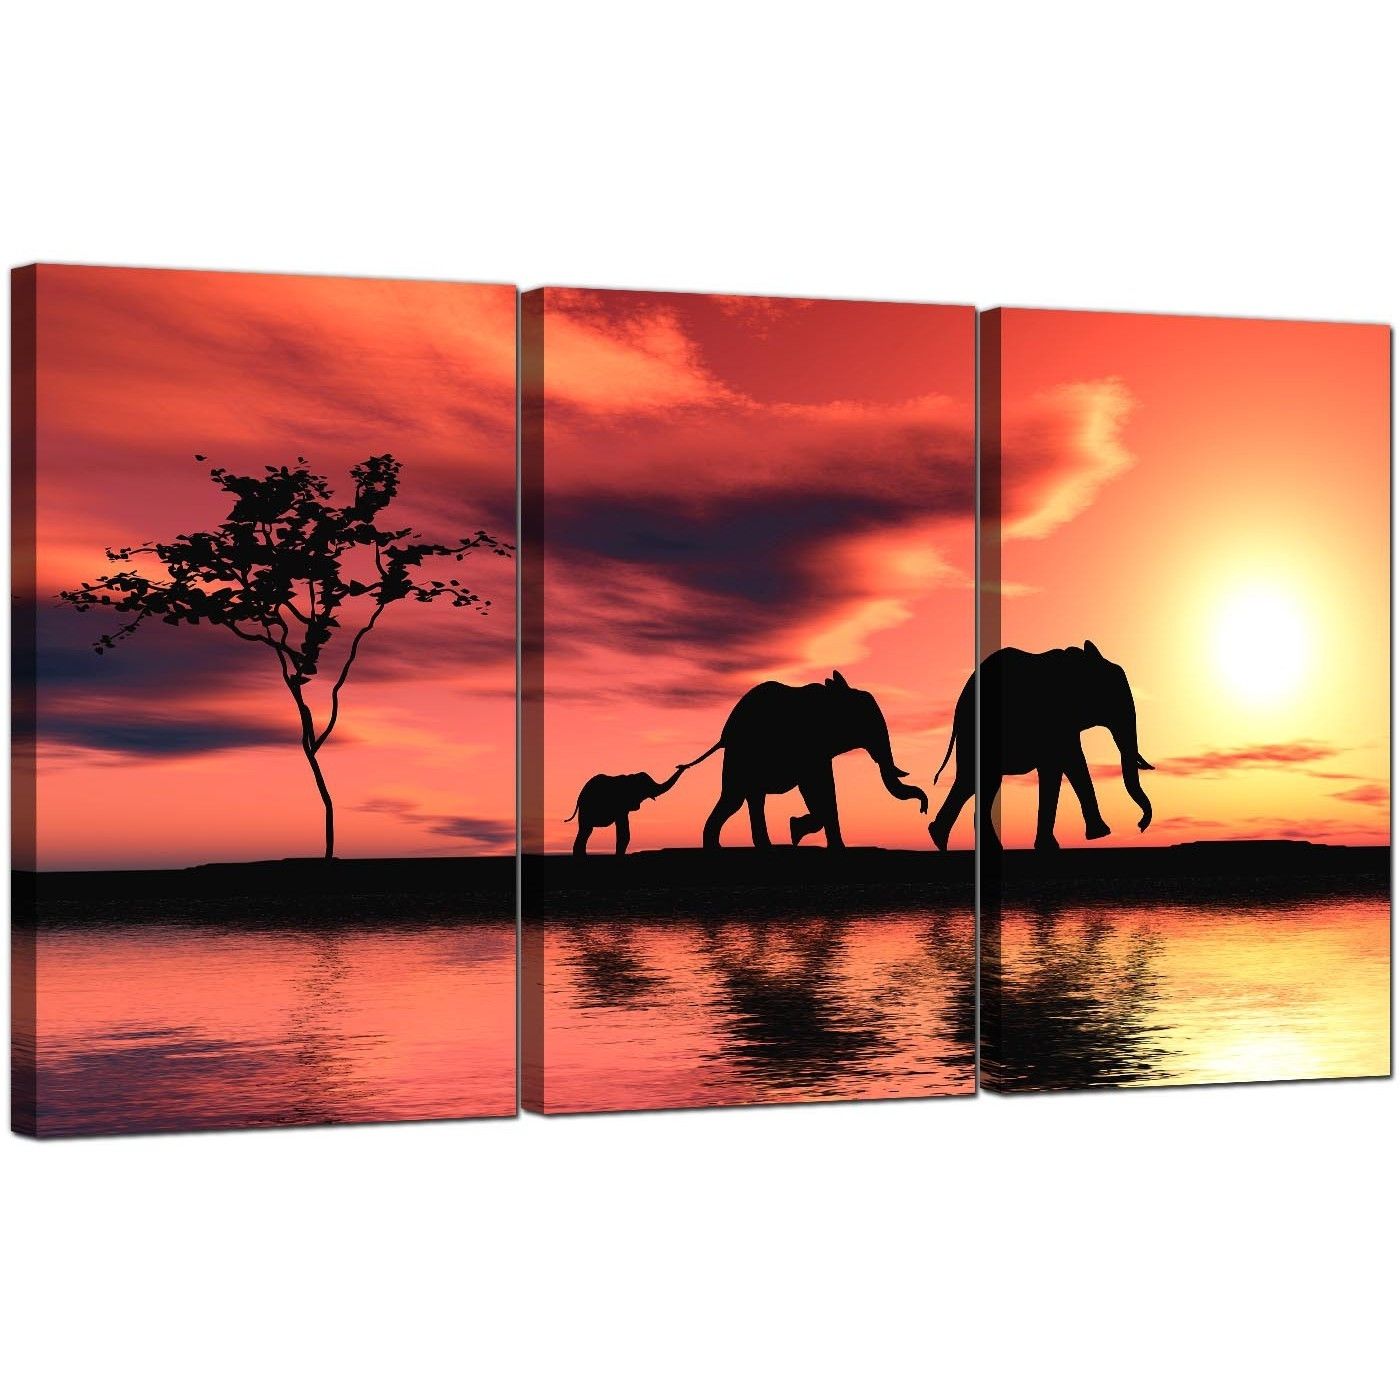 Elephants Canvas Prints Set Of 3 For Your Living Room With Regard To Most Popular Elephant Canvas Wall Art (View 1 of 20)